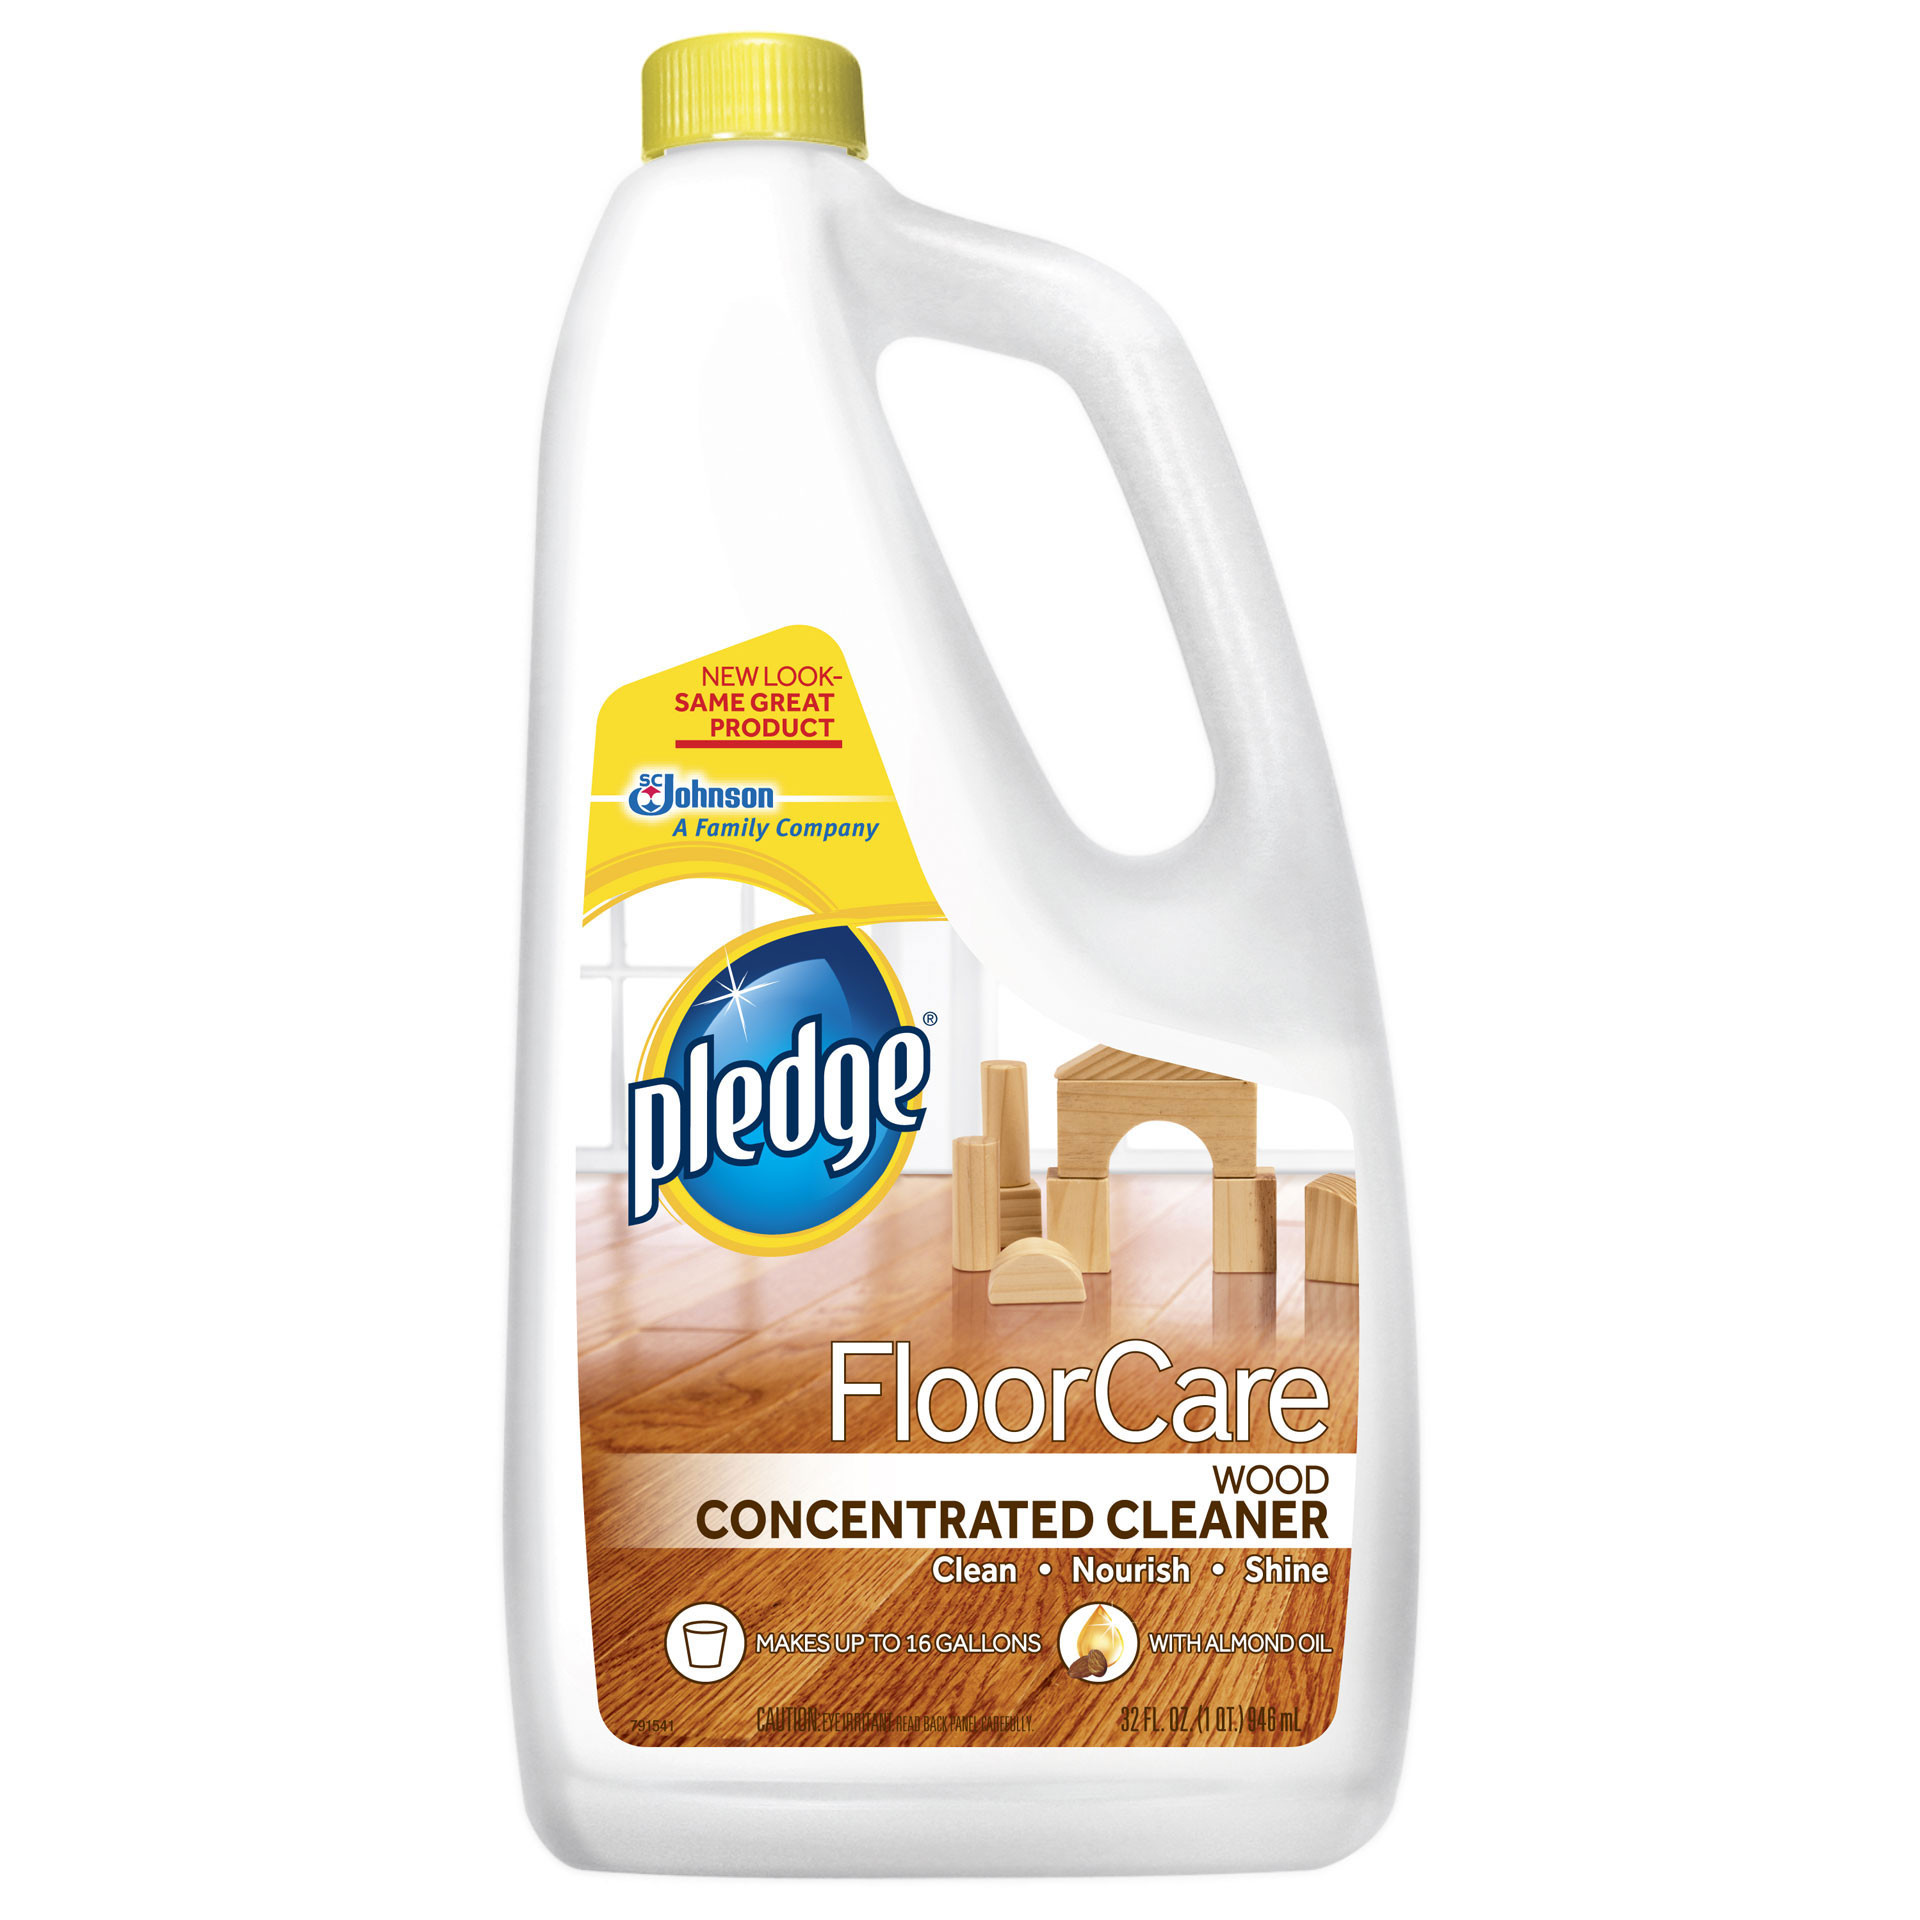 11 Fabulous Bruce Hardwood and Laminate Floor Cleaner Reviews 2024 free download bruce hardwood and laminate floor cleaner reviews of lakeland wood shine hard floor cleaner 1 litre ebay pertaining to pledge floorcare wood concentrated cleaner review